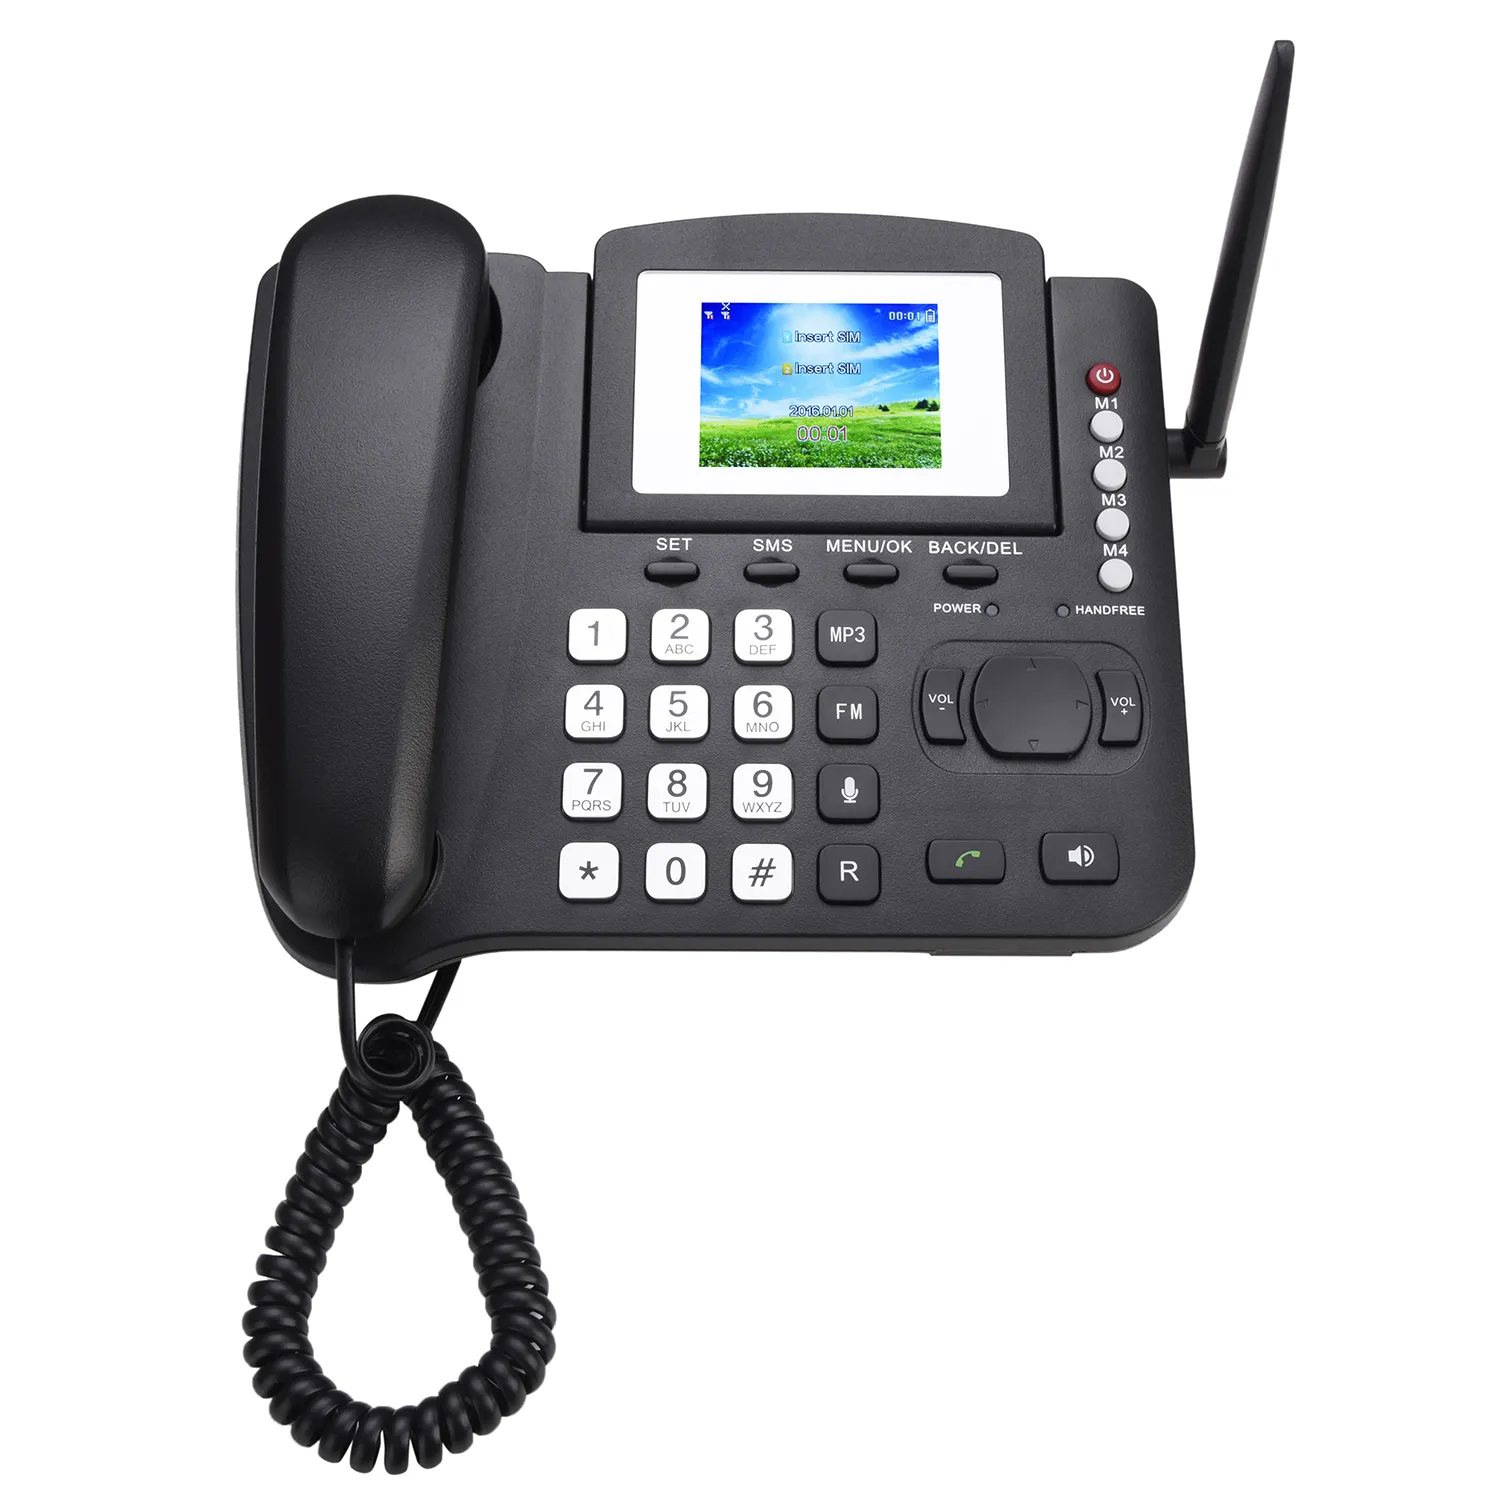 2G GSM Fixed Wireless Phone Cordless Desktop Telephone Desk Terminals With 2.8 inch Color Display Daul Sim Card For Office Home